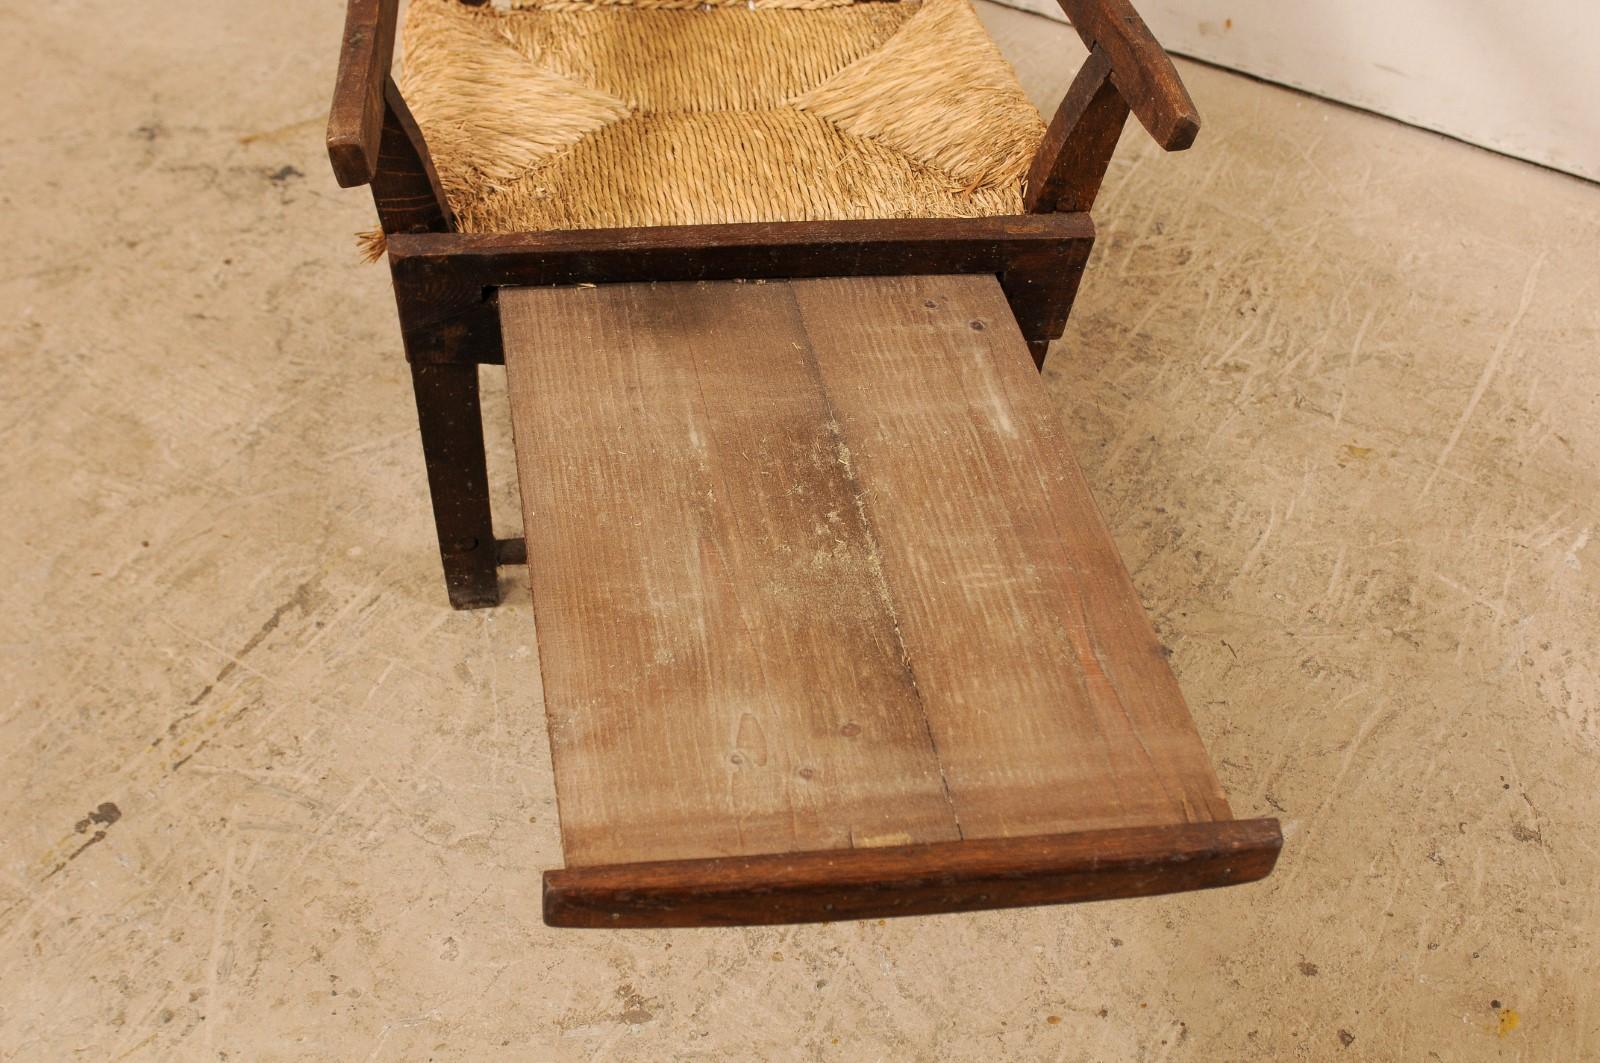 Italian Sling Lounge Chair w/ Rush Seating & Extendable Foot-Rest, Early 20th C. For Sale 3